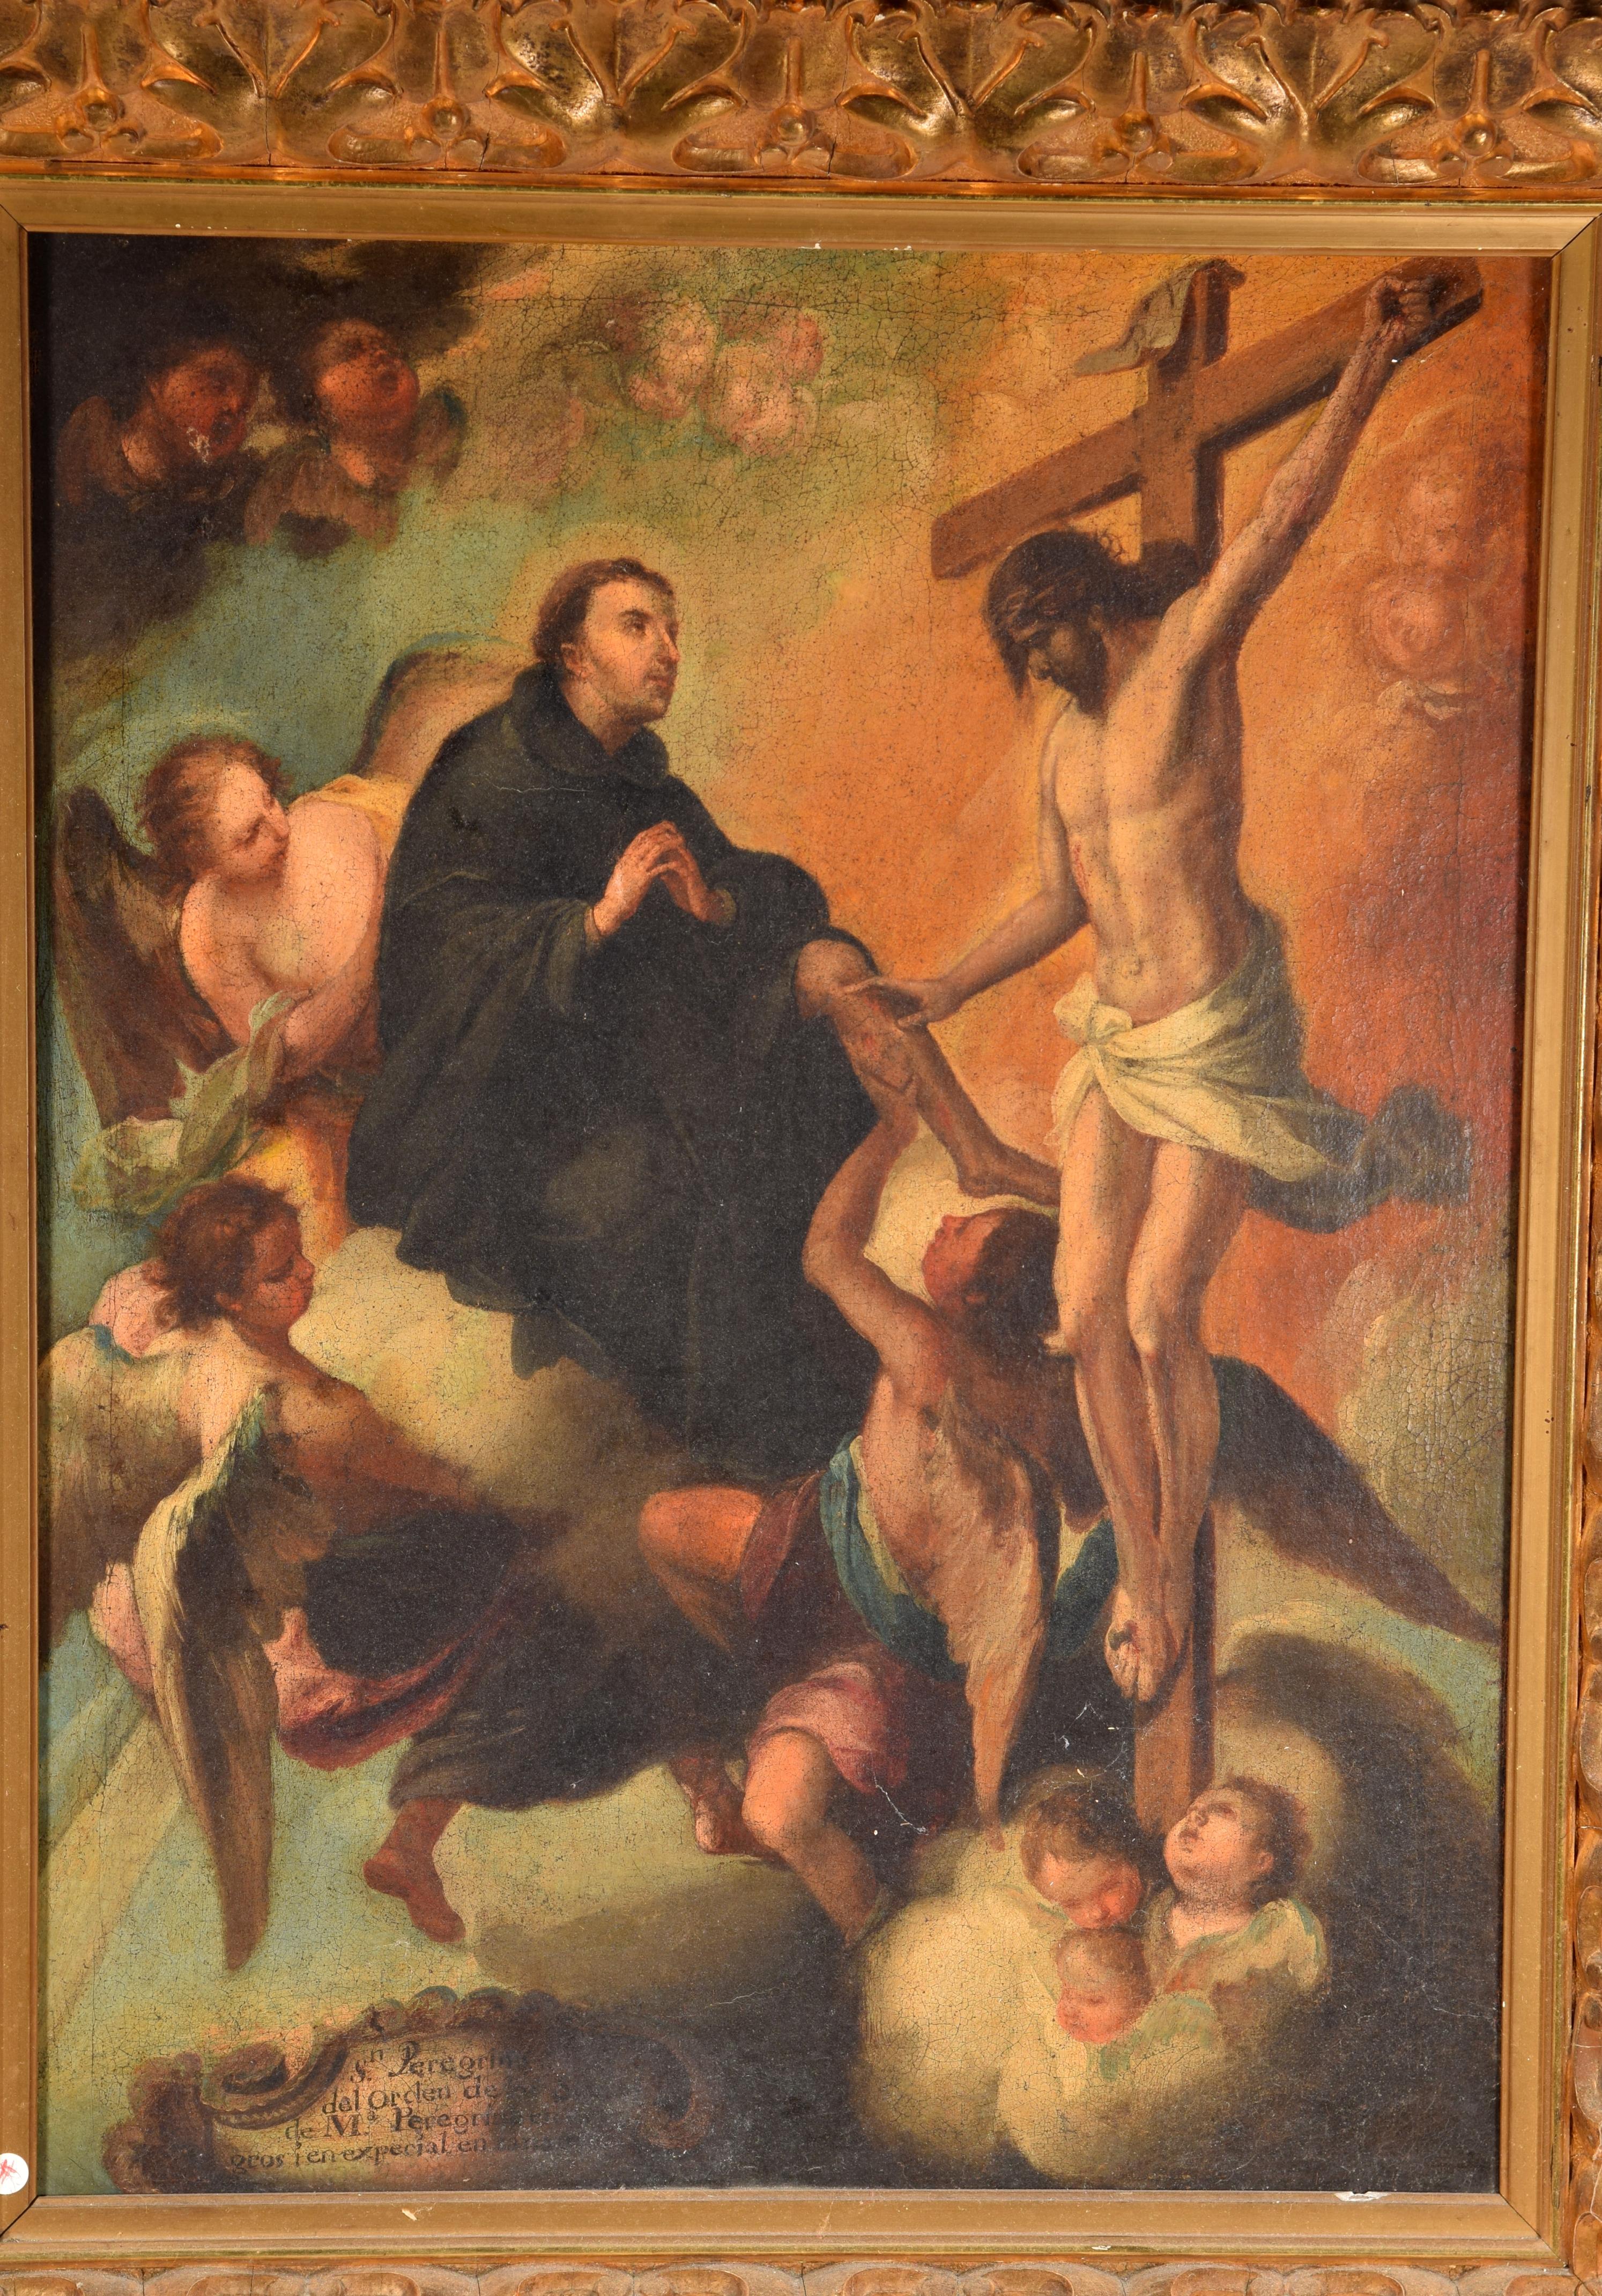 Miracle of Saint Peregrine Laziosi. Oil on canvas. Spanish School, 18th century.
Oil on canvas showing a man surrounded by angels and seated on a cloud of angels and seated on a cloud next to the crucified Christ
crucified Christ, who touches the